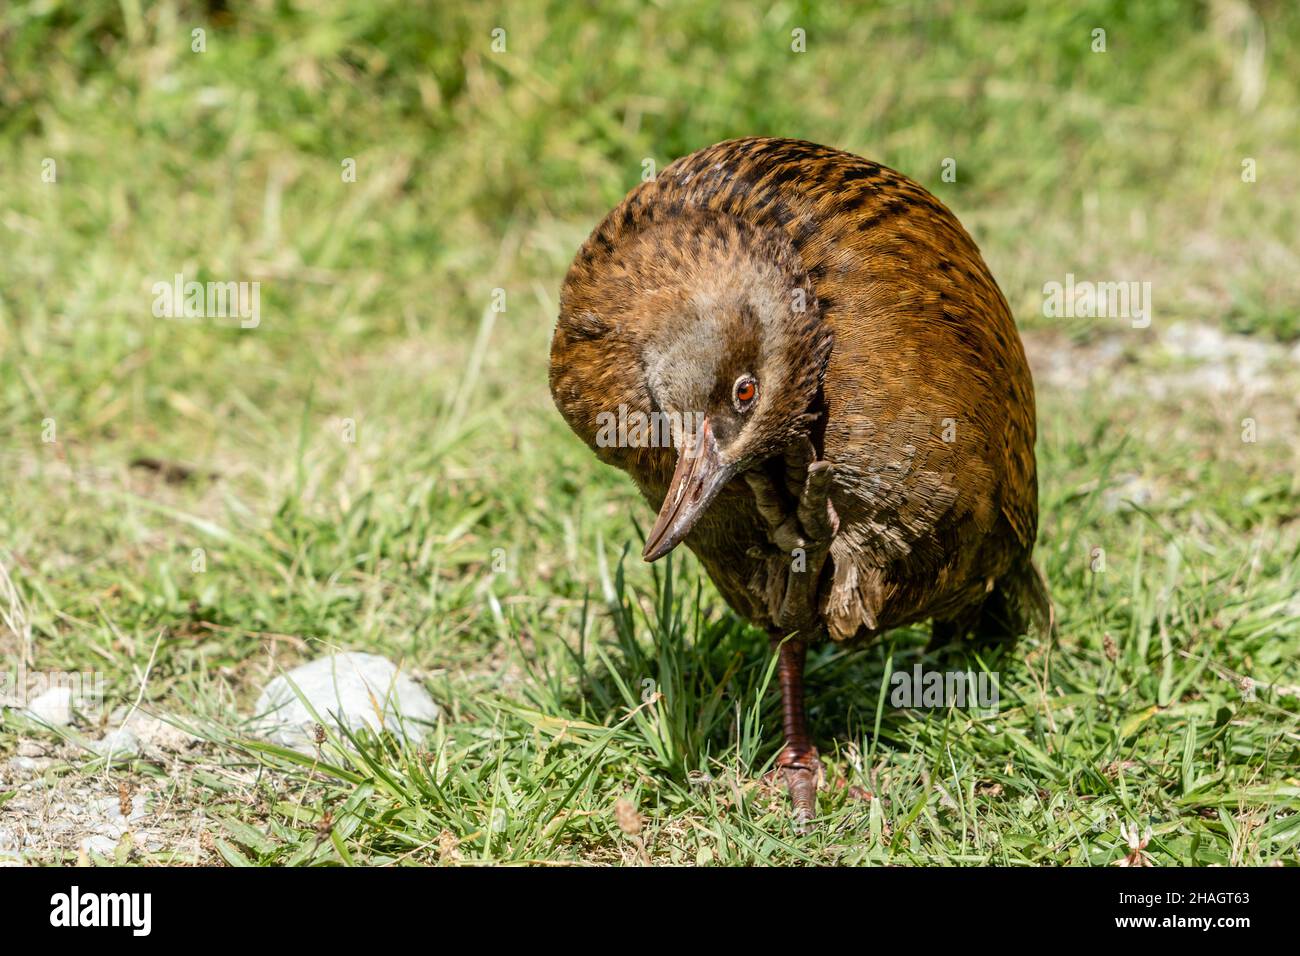 The Weka is a flightless bird in New Zealand. It is about the size of a domestic chicken. Stock Photo